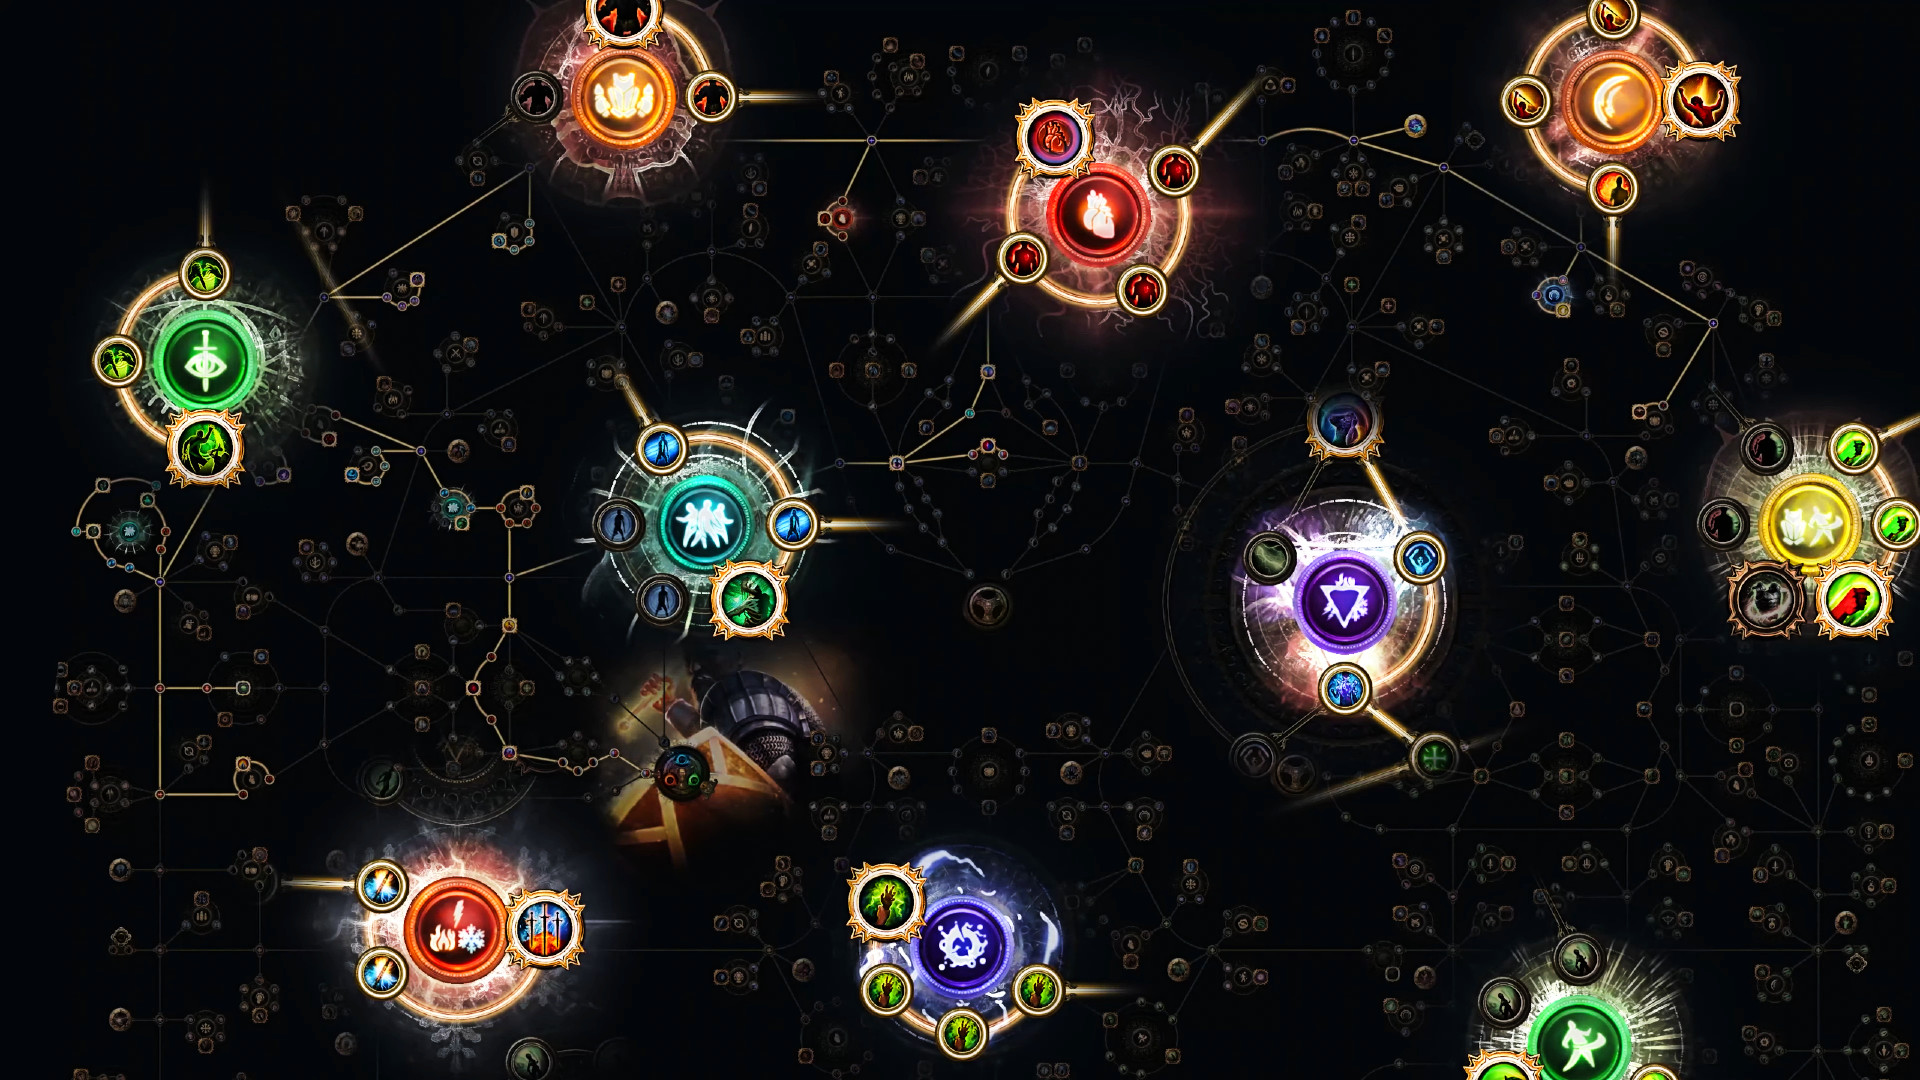 Path of Exile: Scourge arrives next week with a passive skill tree rework